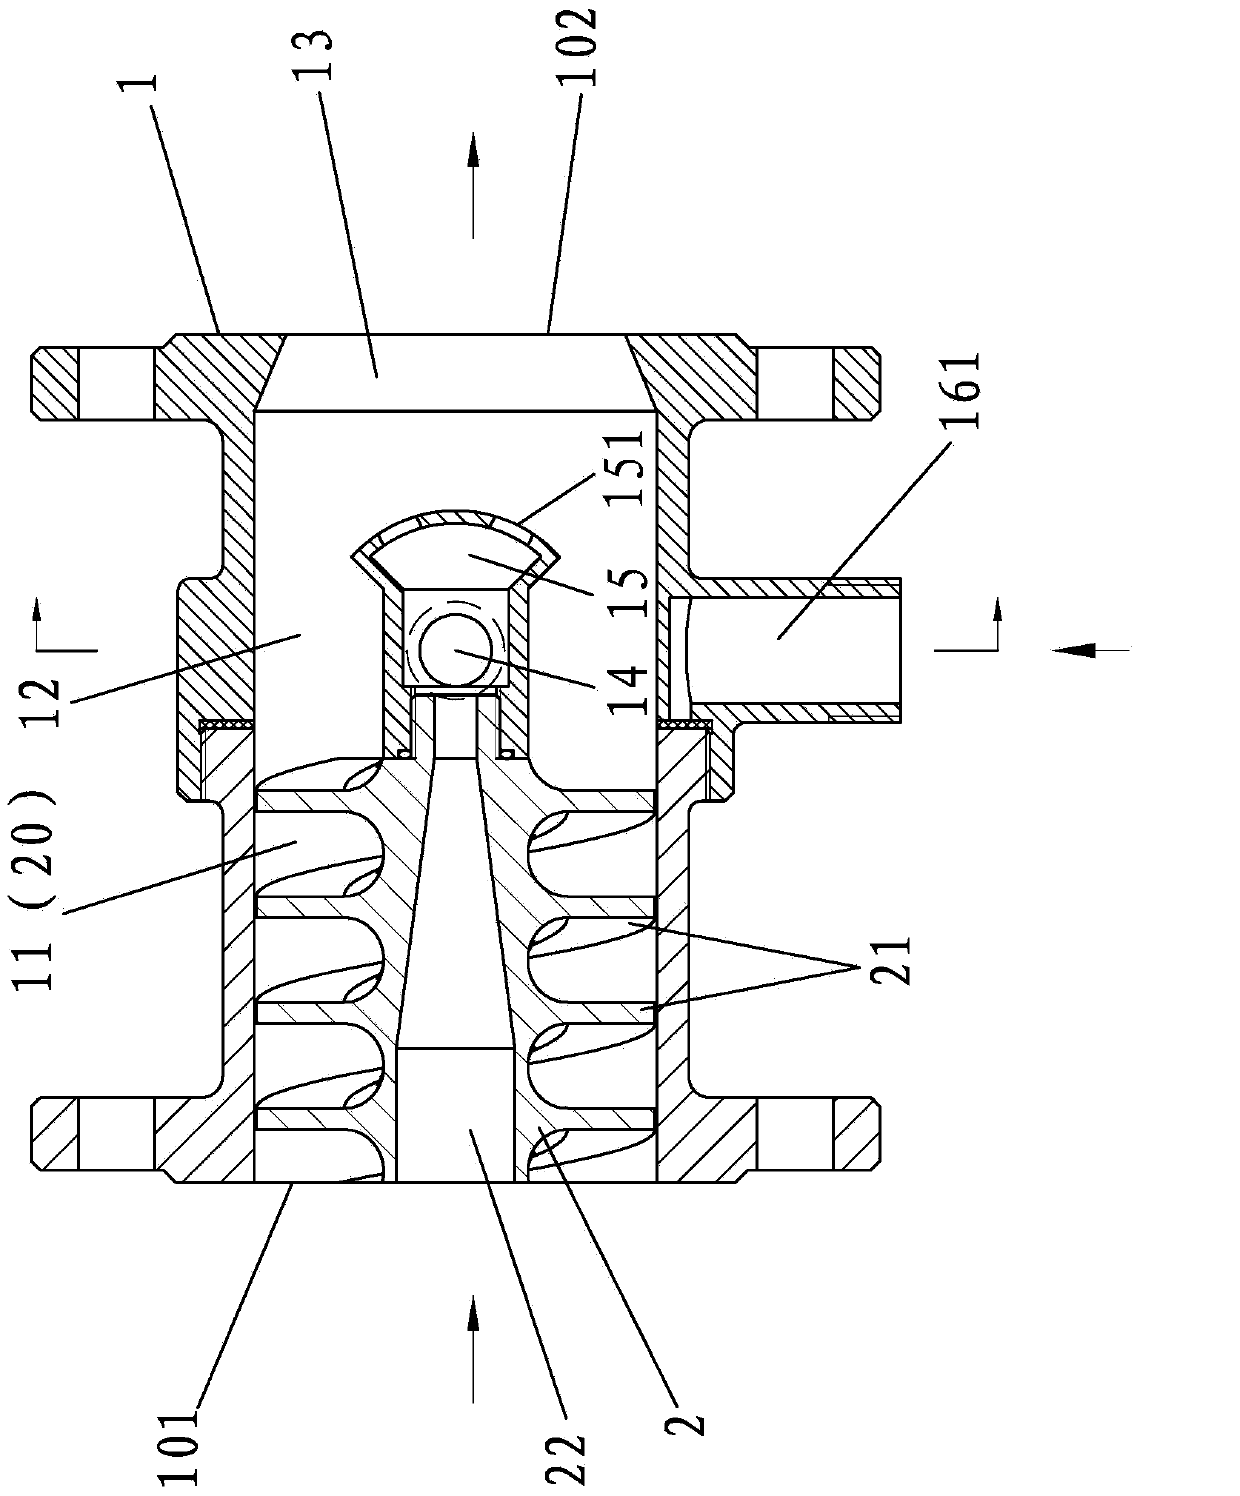 Spiral flow mixer for positive pressure metering injection type proportionally-mixing device